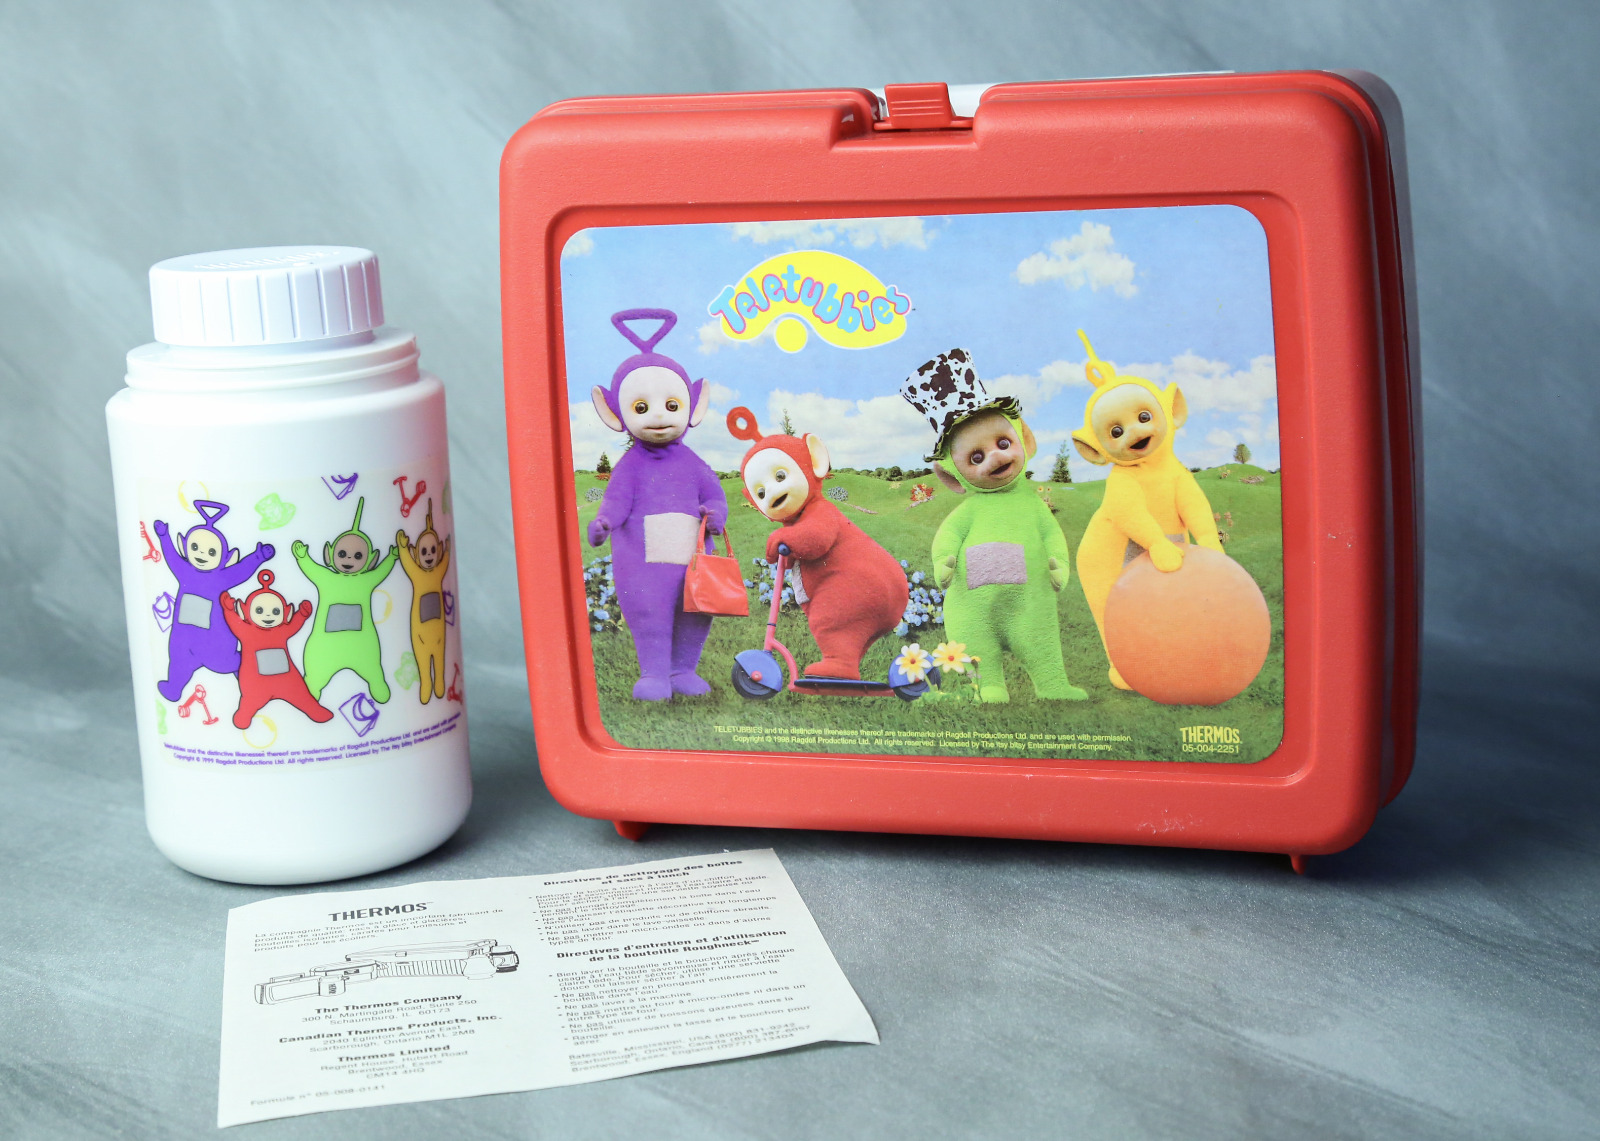 Vintage 1998 Teletubbies Lunchbox by Thermos never used super clean